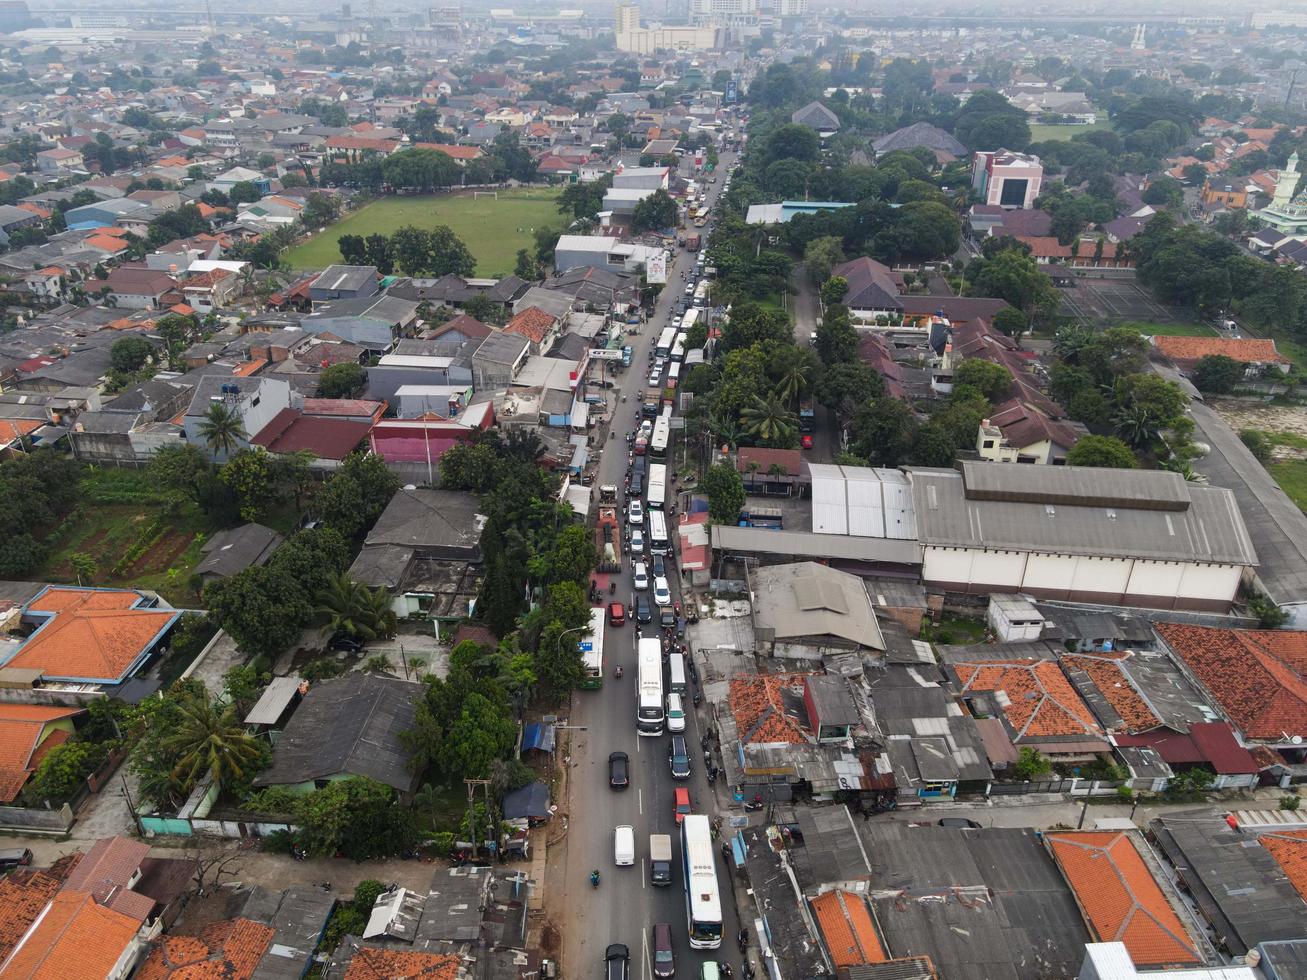 Bekasi, Indonesia 2021- Traffic jam on the polluted streets of Bekasi with the highest number of motor vehicles and traffic congestion photo